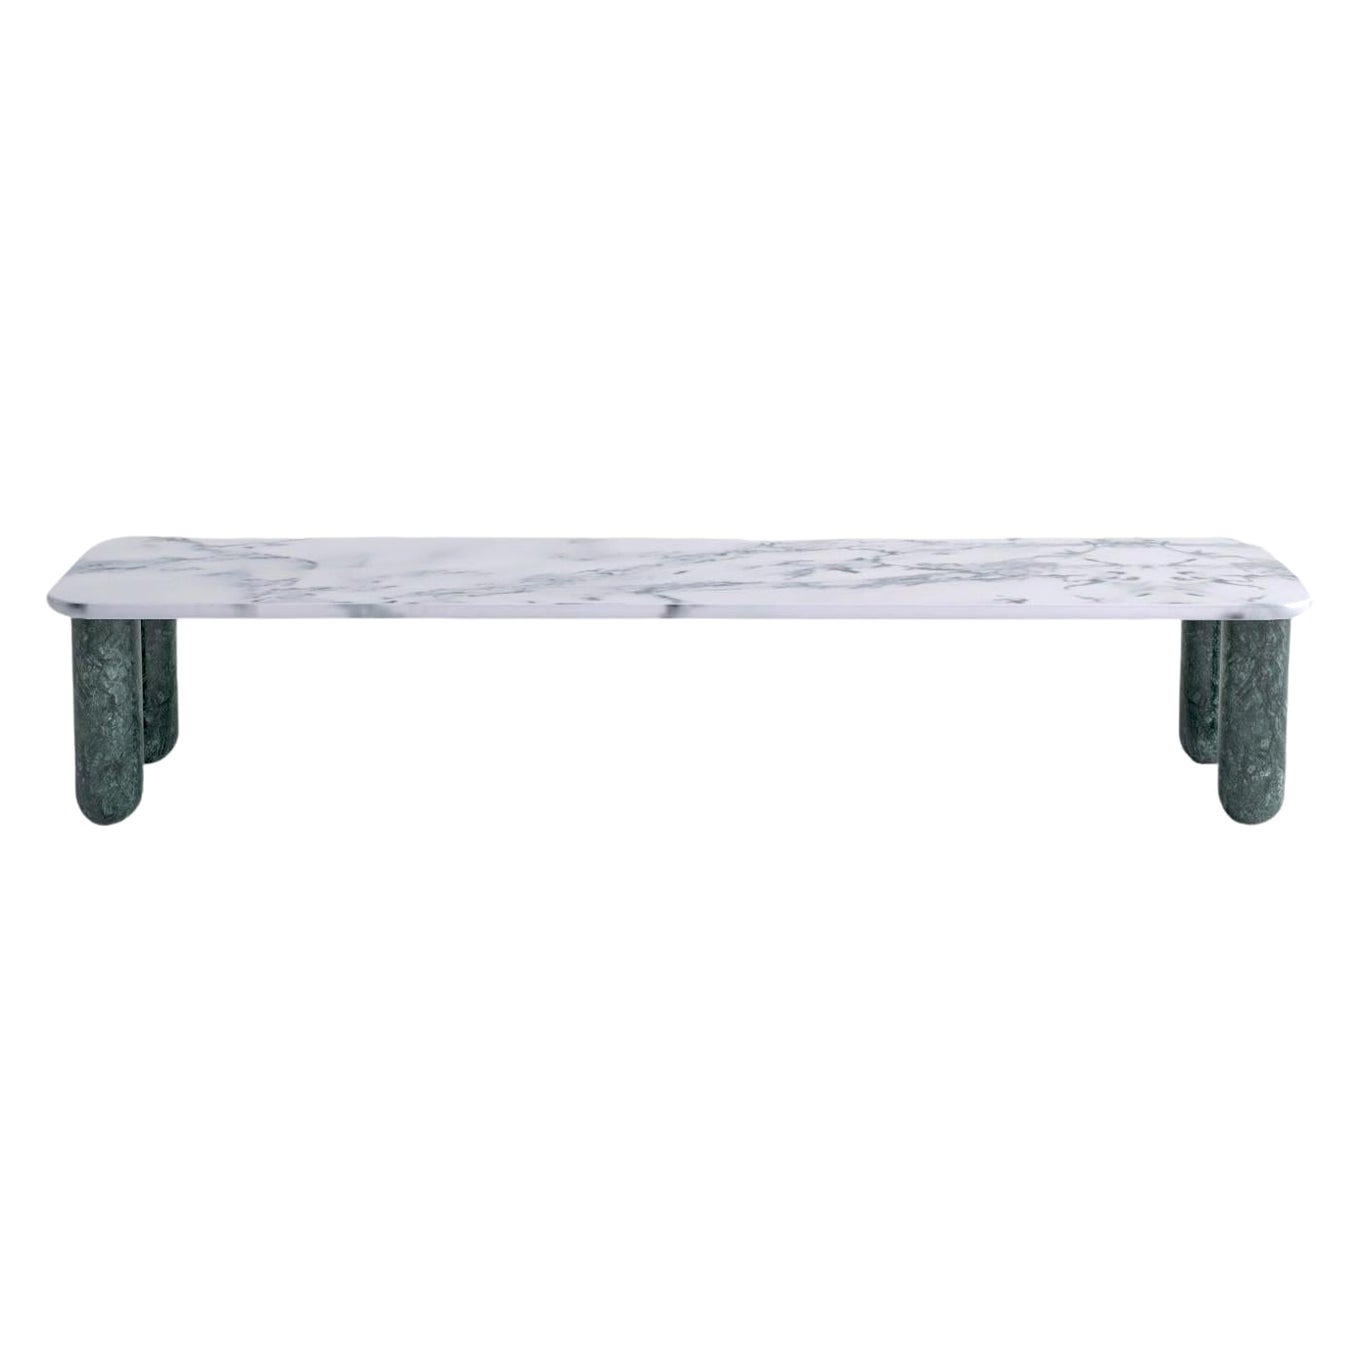 Large White and Green Marble "Sunday" Coffee Table, Jean-Baptiste Souletie For Sale